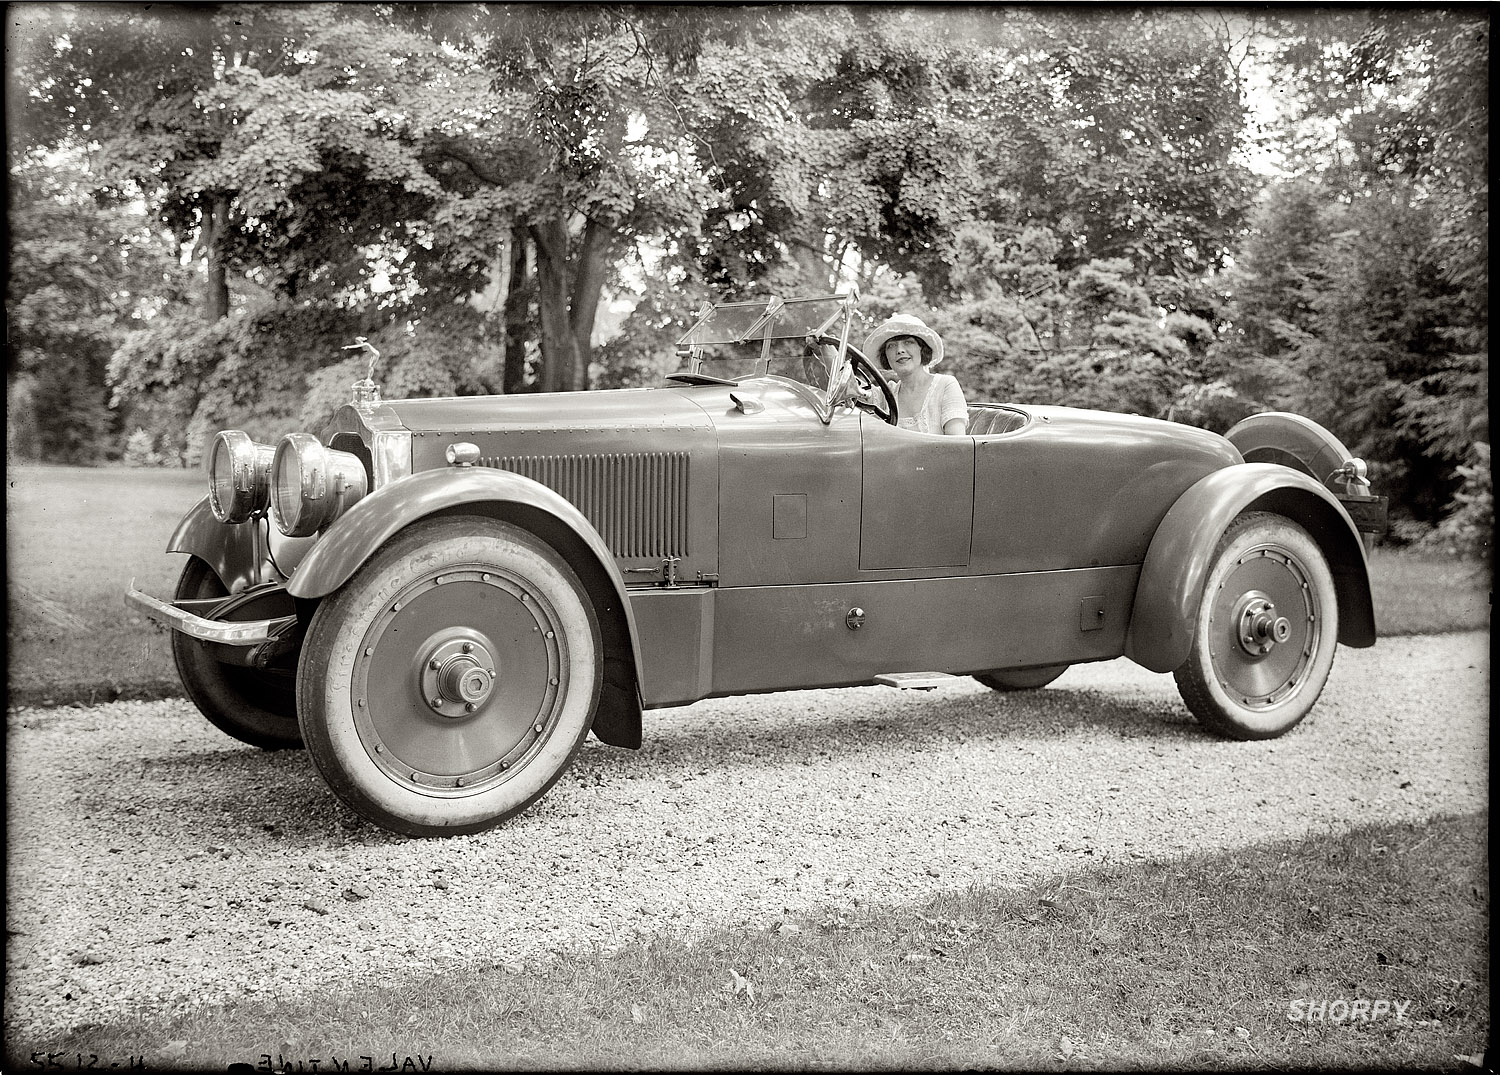 The actress Grace Valentine circa 1920 in an expensive looking Packard roadster. 5x7 glass negative, George Grantham Bain Collection. View full size.